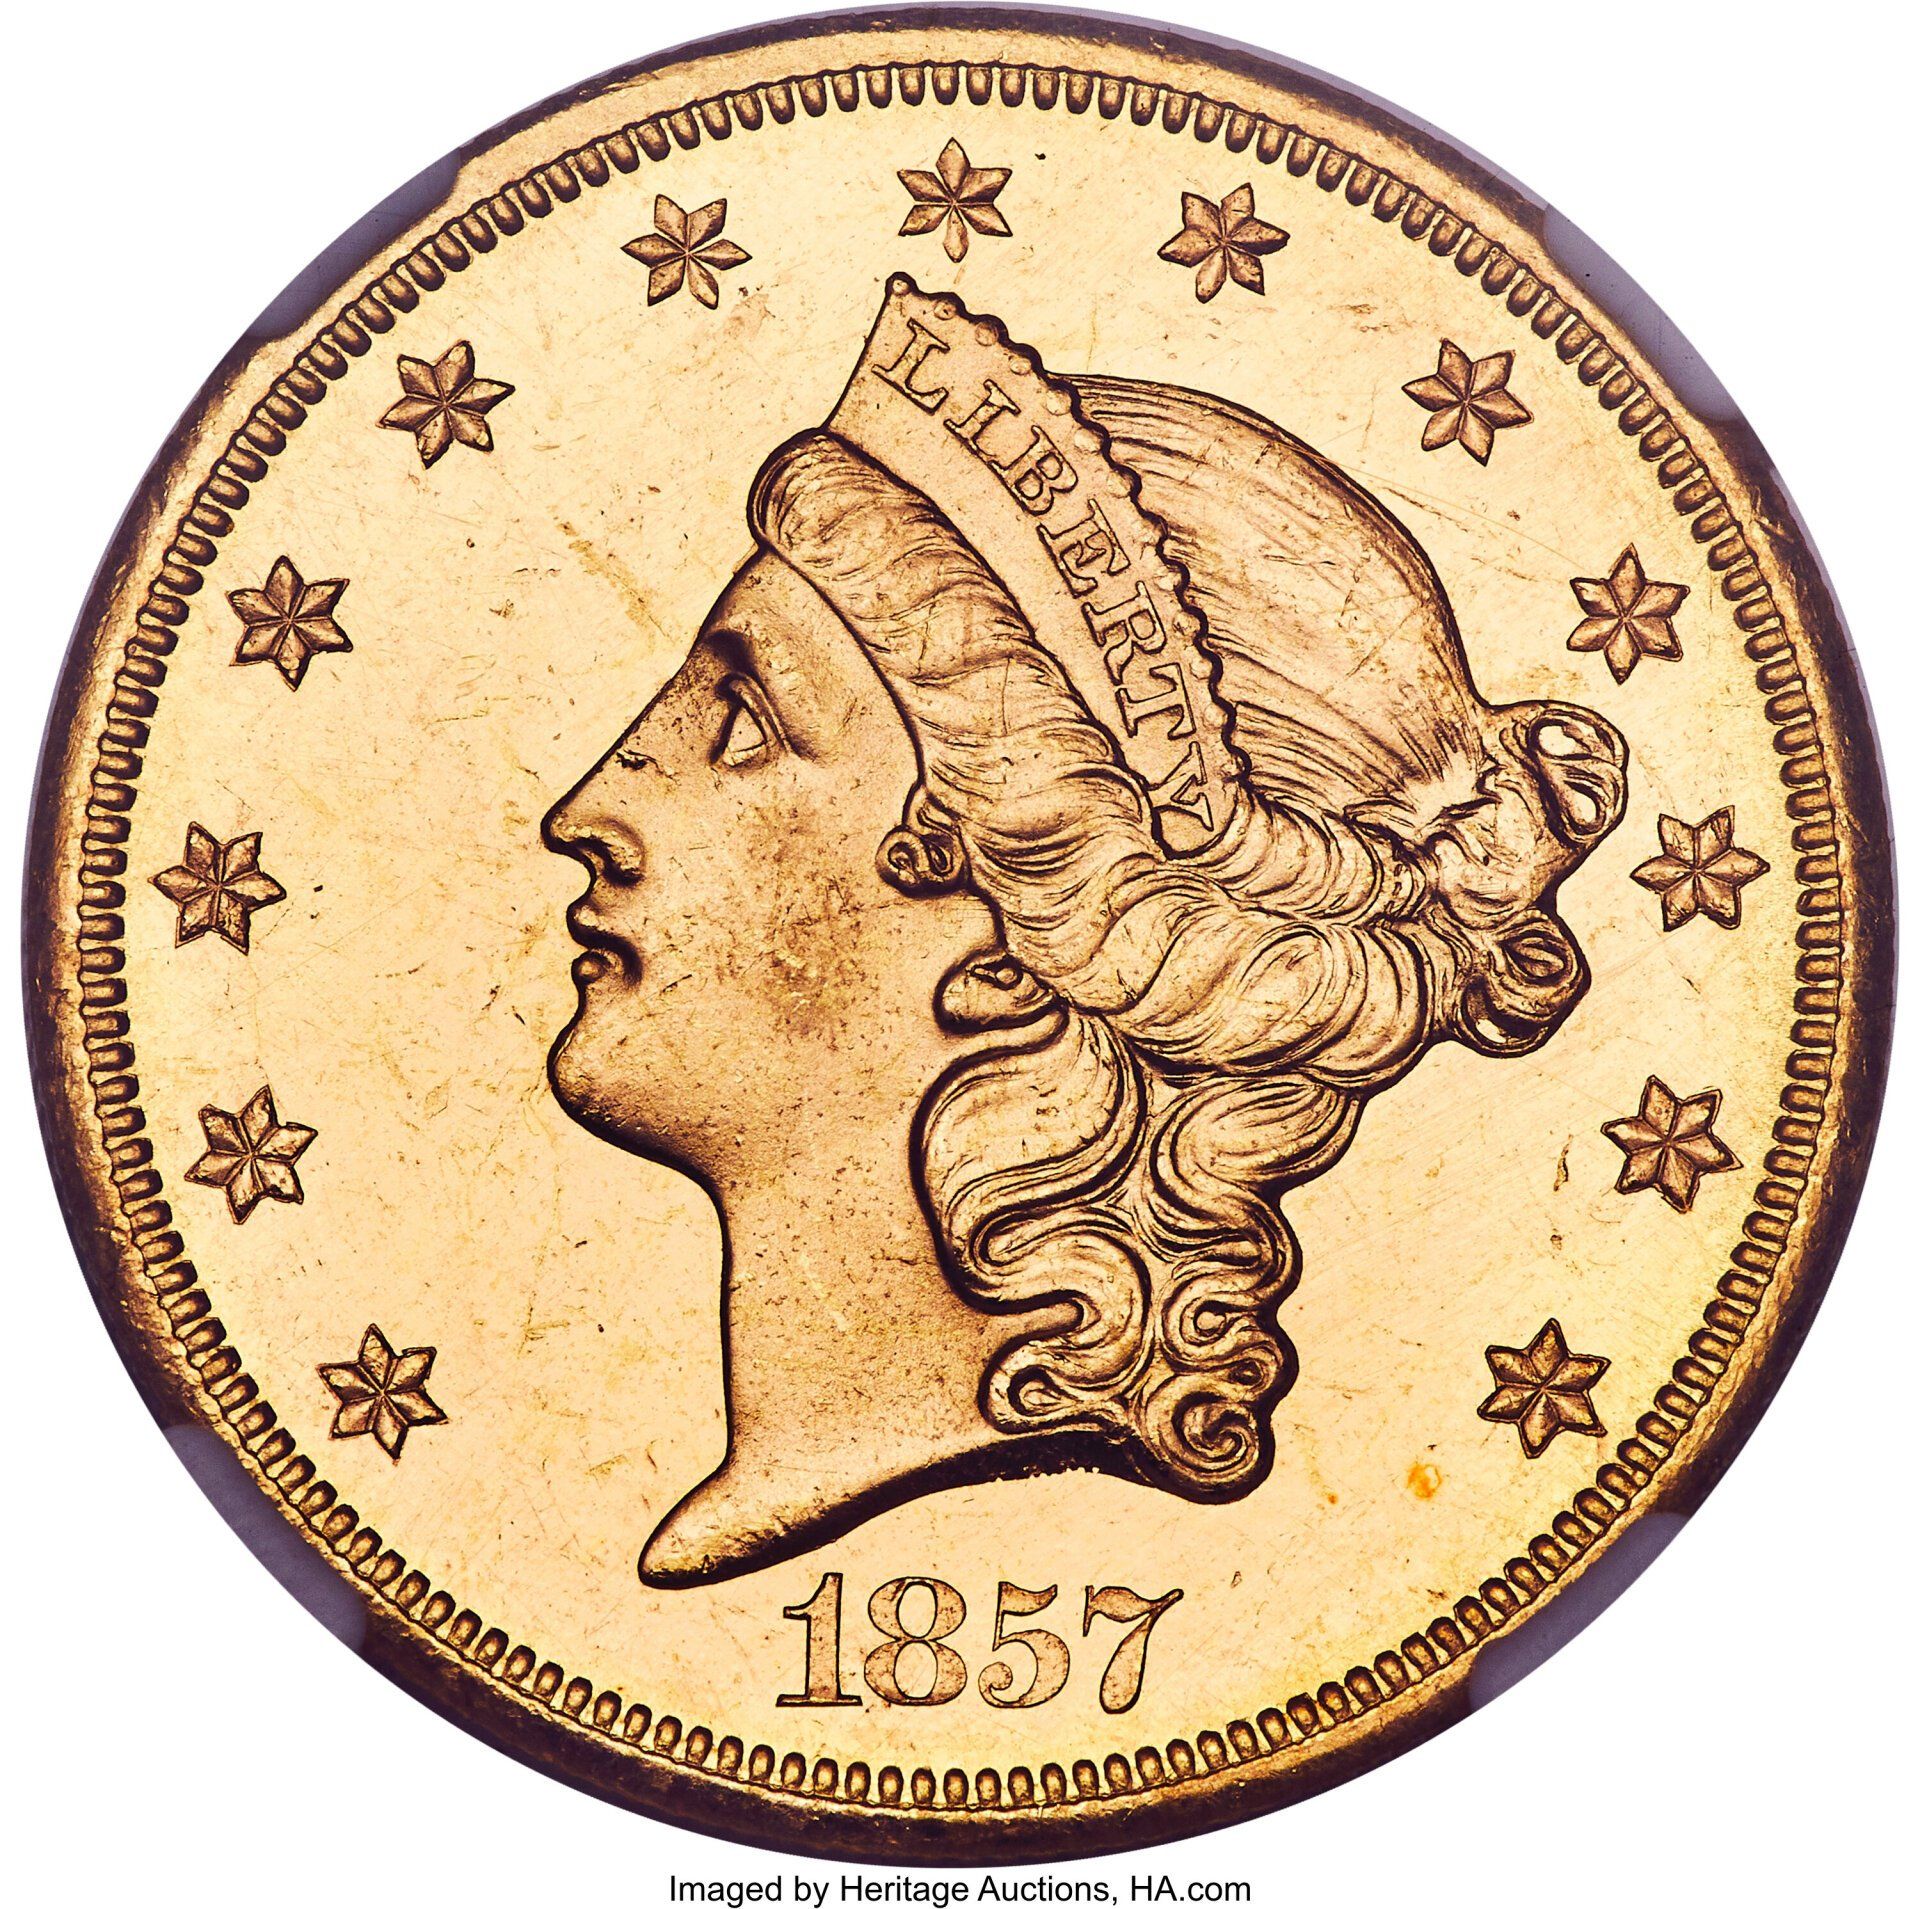 1857 s Double Eagle from the S.S. Central America.  Imaged by Heritage Auctions, HA.com